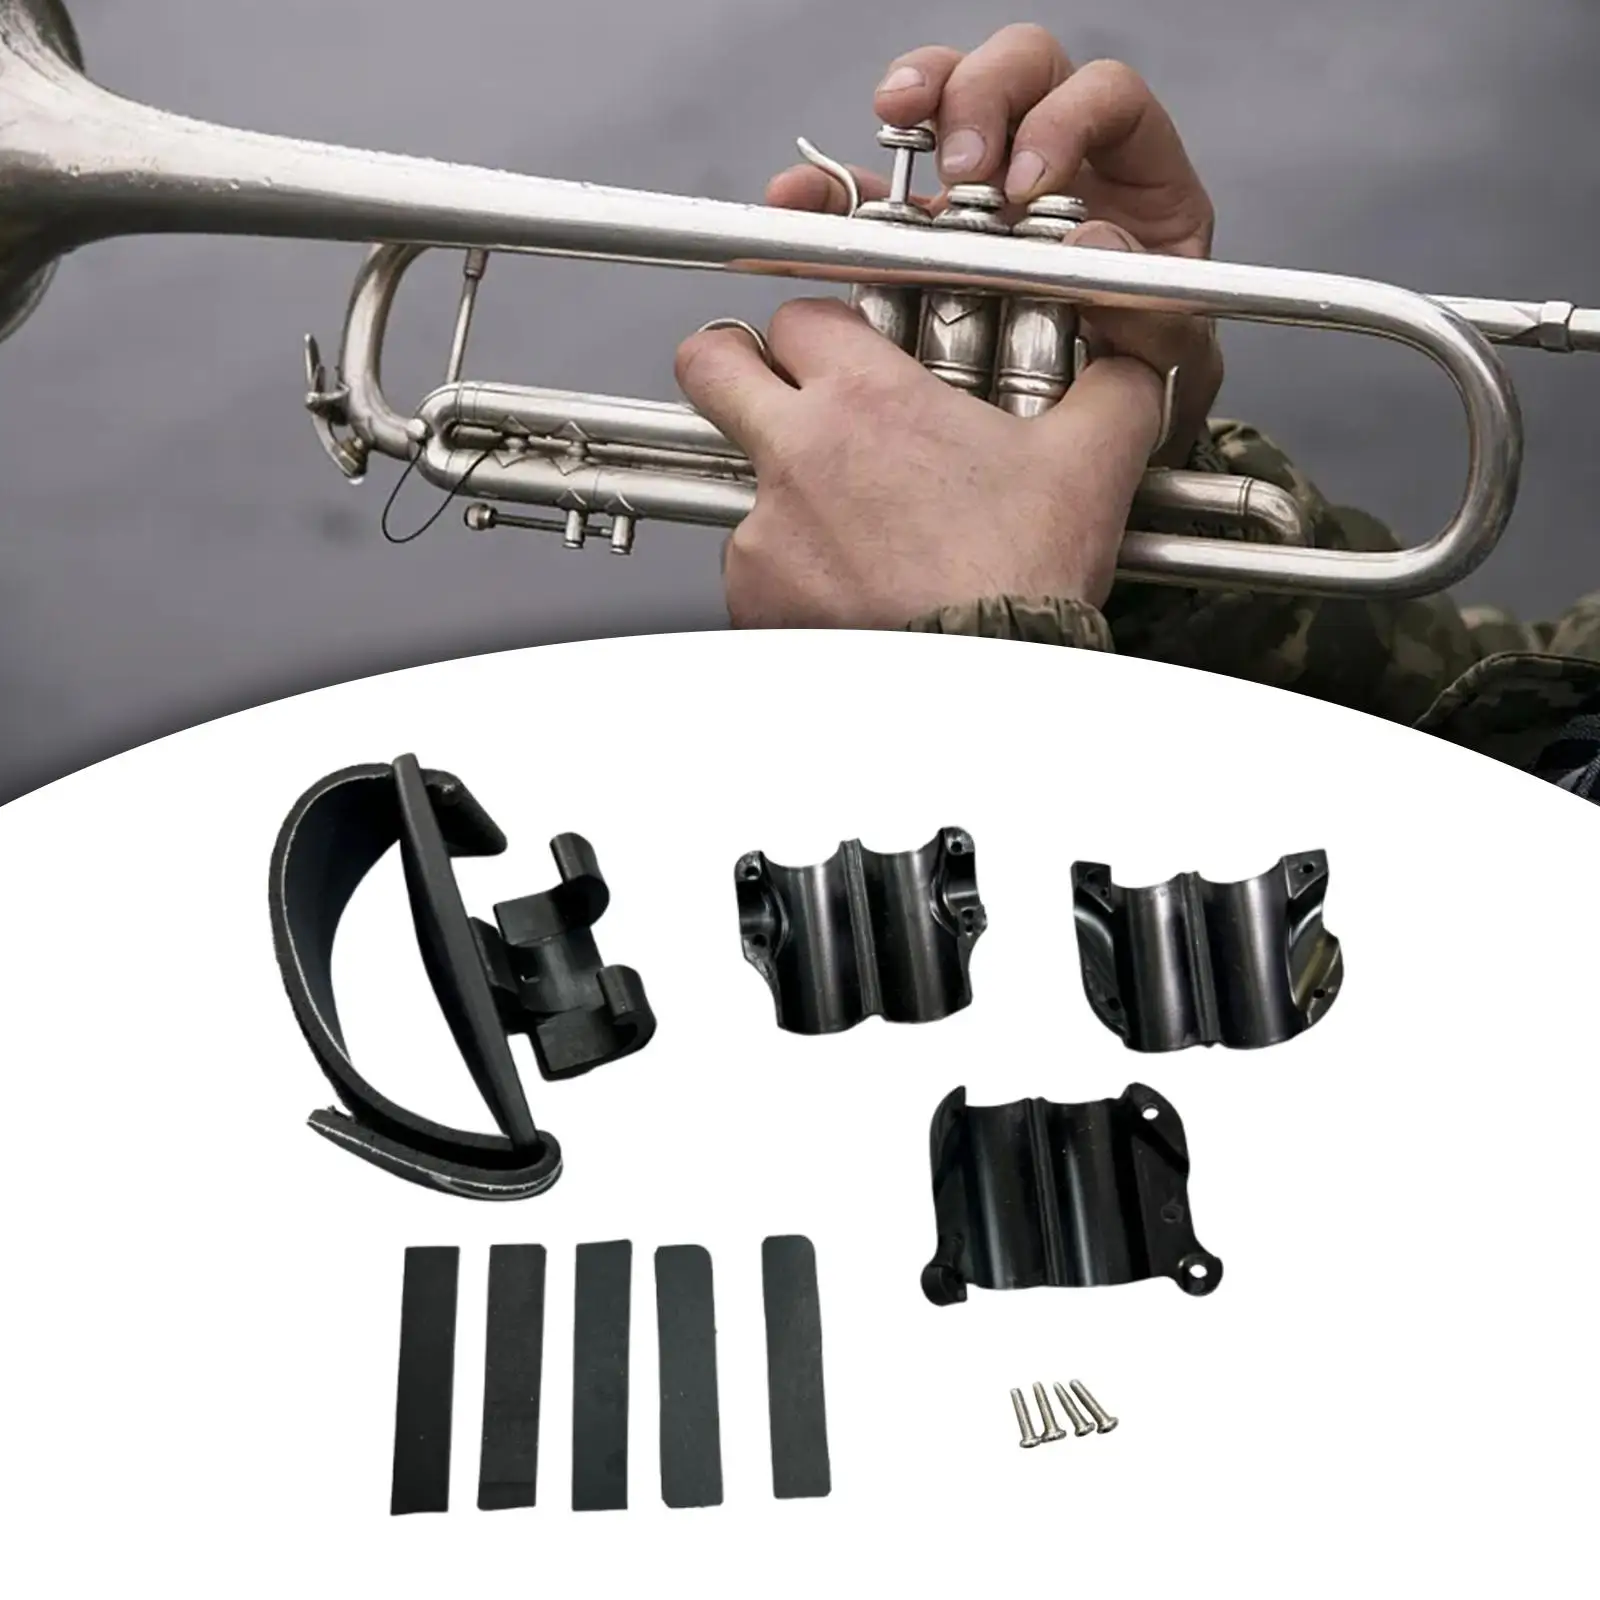 Trombone Grip Adjustable Guard Maintain A Proper Playing Position Black Wraps Cleaning Care Accessories with Screws and Straps